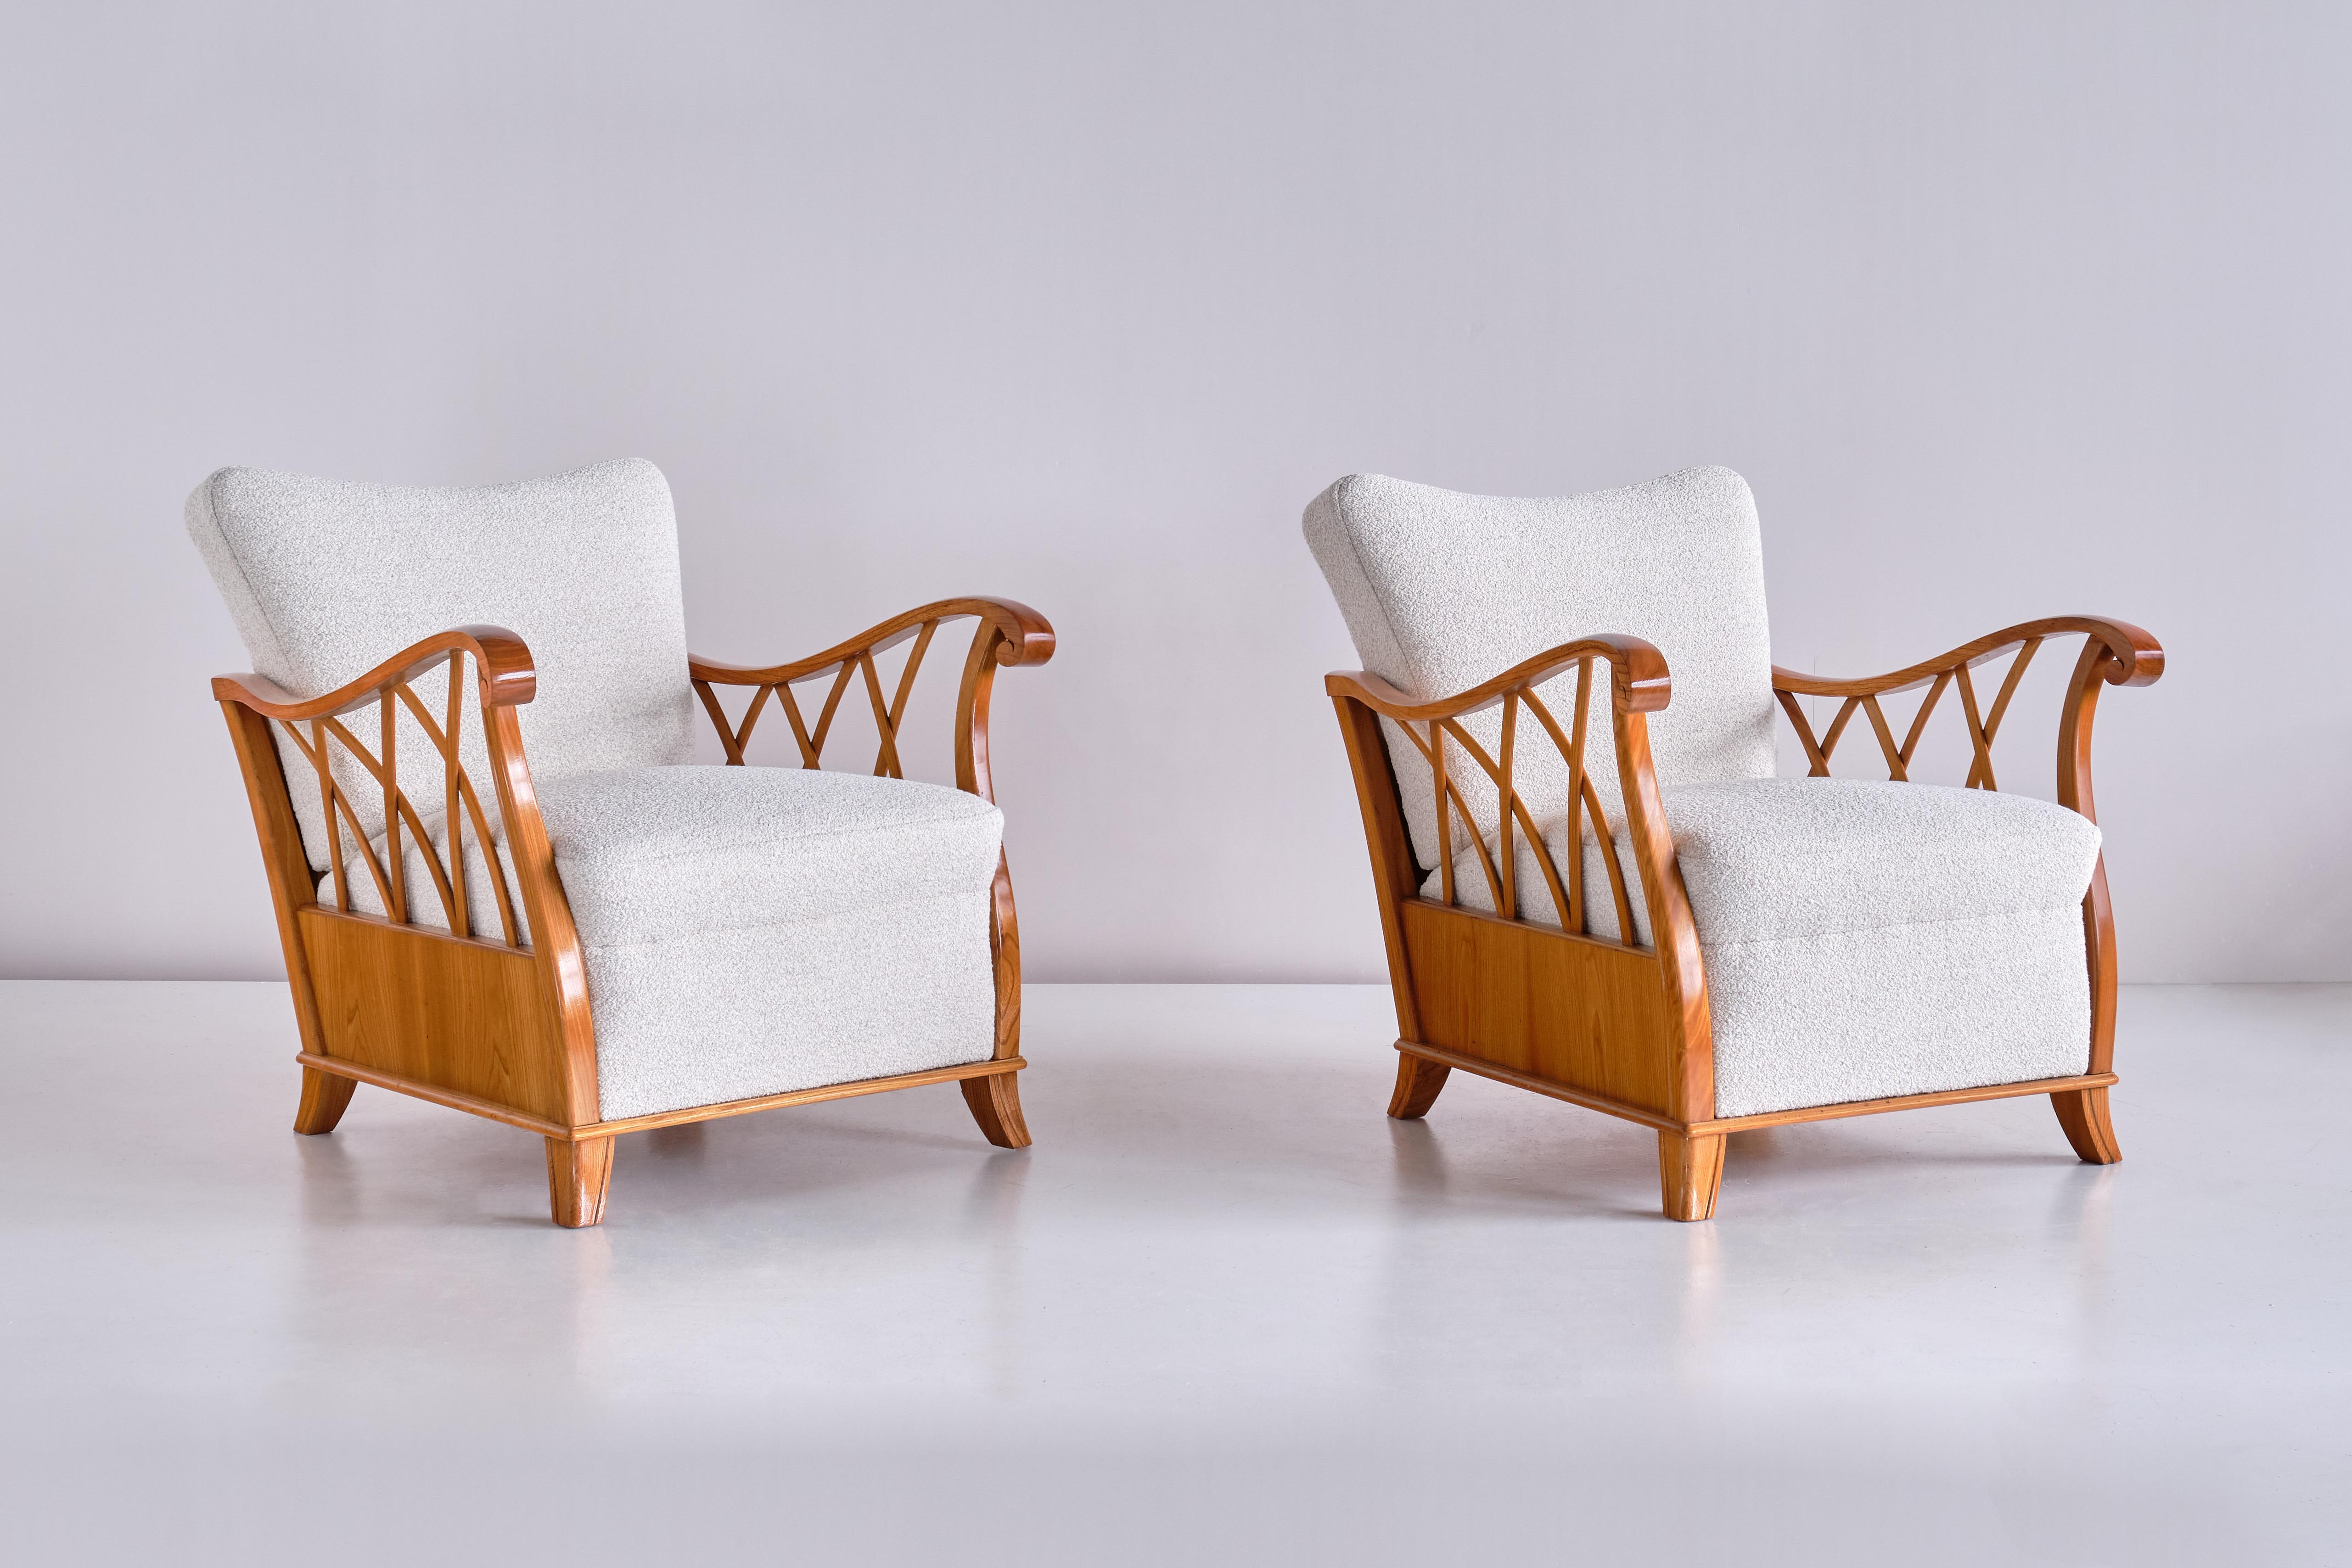 This rare pair of armchairs was designed by Maurizio Tempestini in the late 1940s. The elm wood frames are characterized by the delicate lines of the open arms and the tapered legs. The shape is further accentuated by the curved lines of the